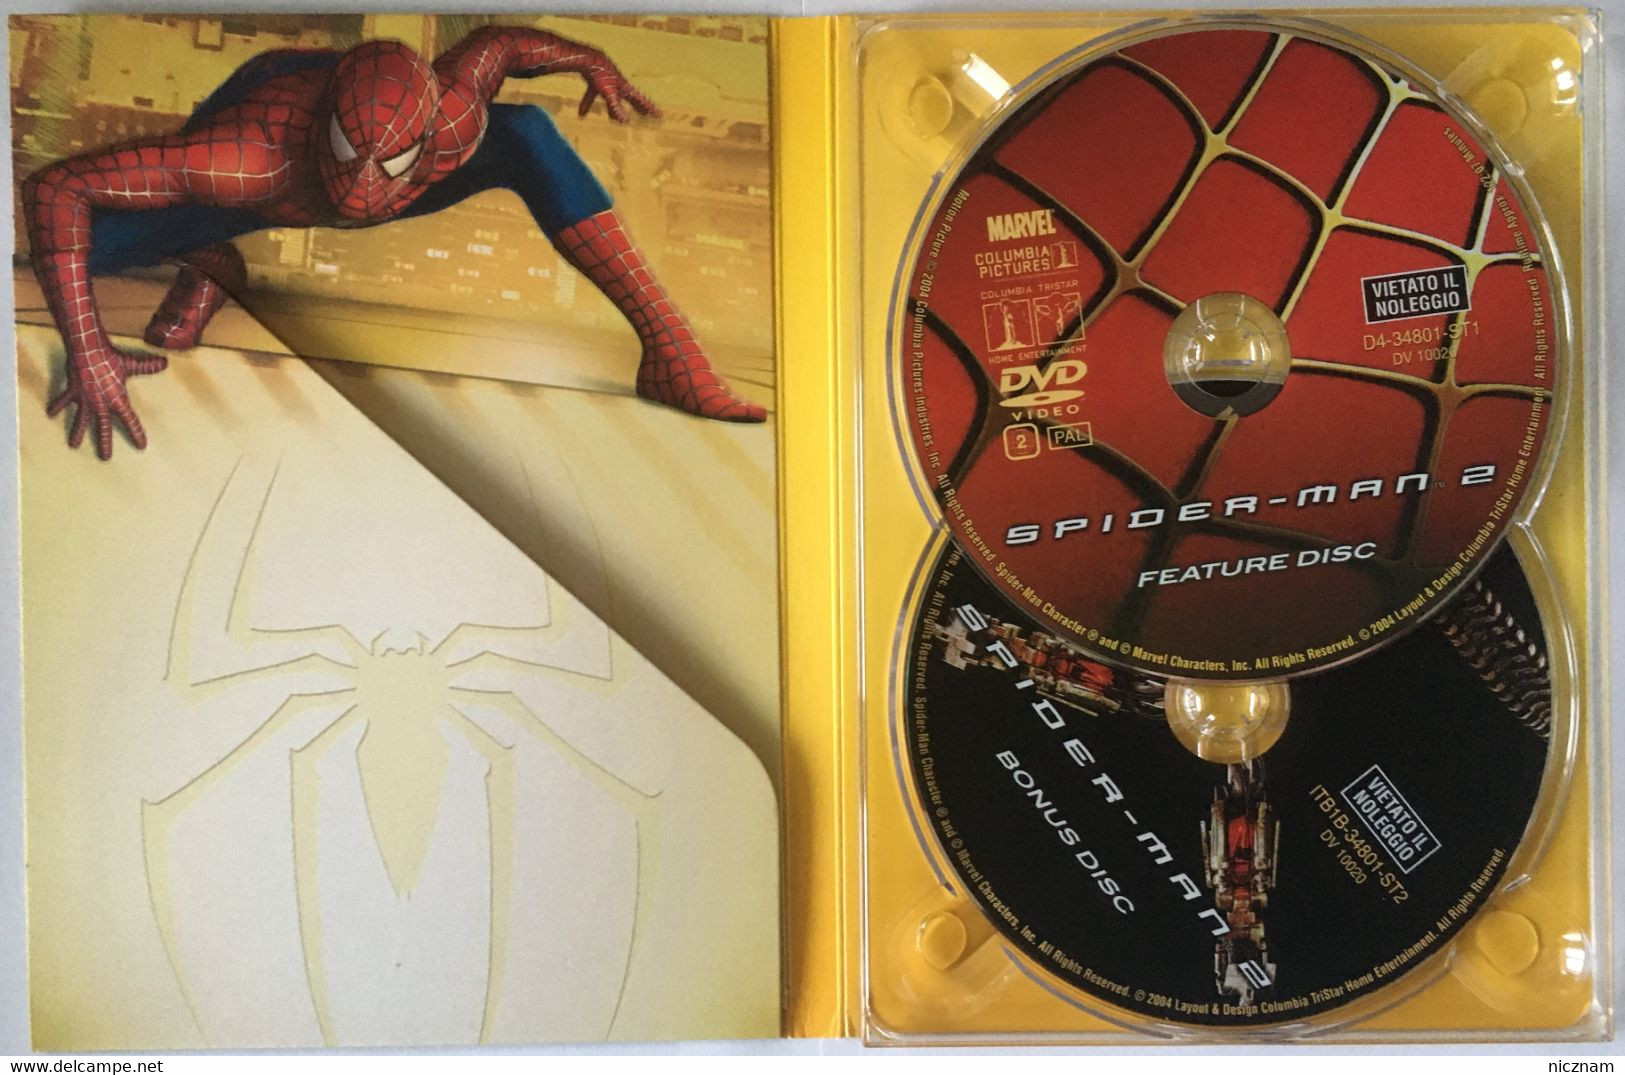 DVD SPIDERMAN 2 - Collector's Limited Edition (Version IT) - Tirage limité - Exemplaire no 162